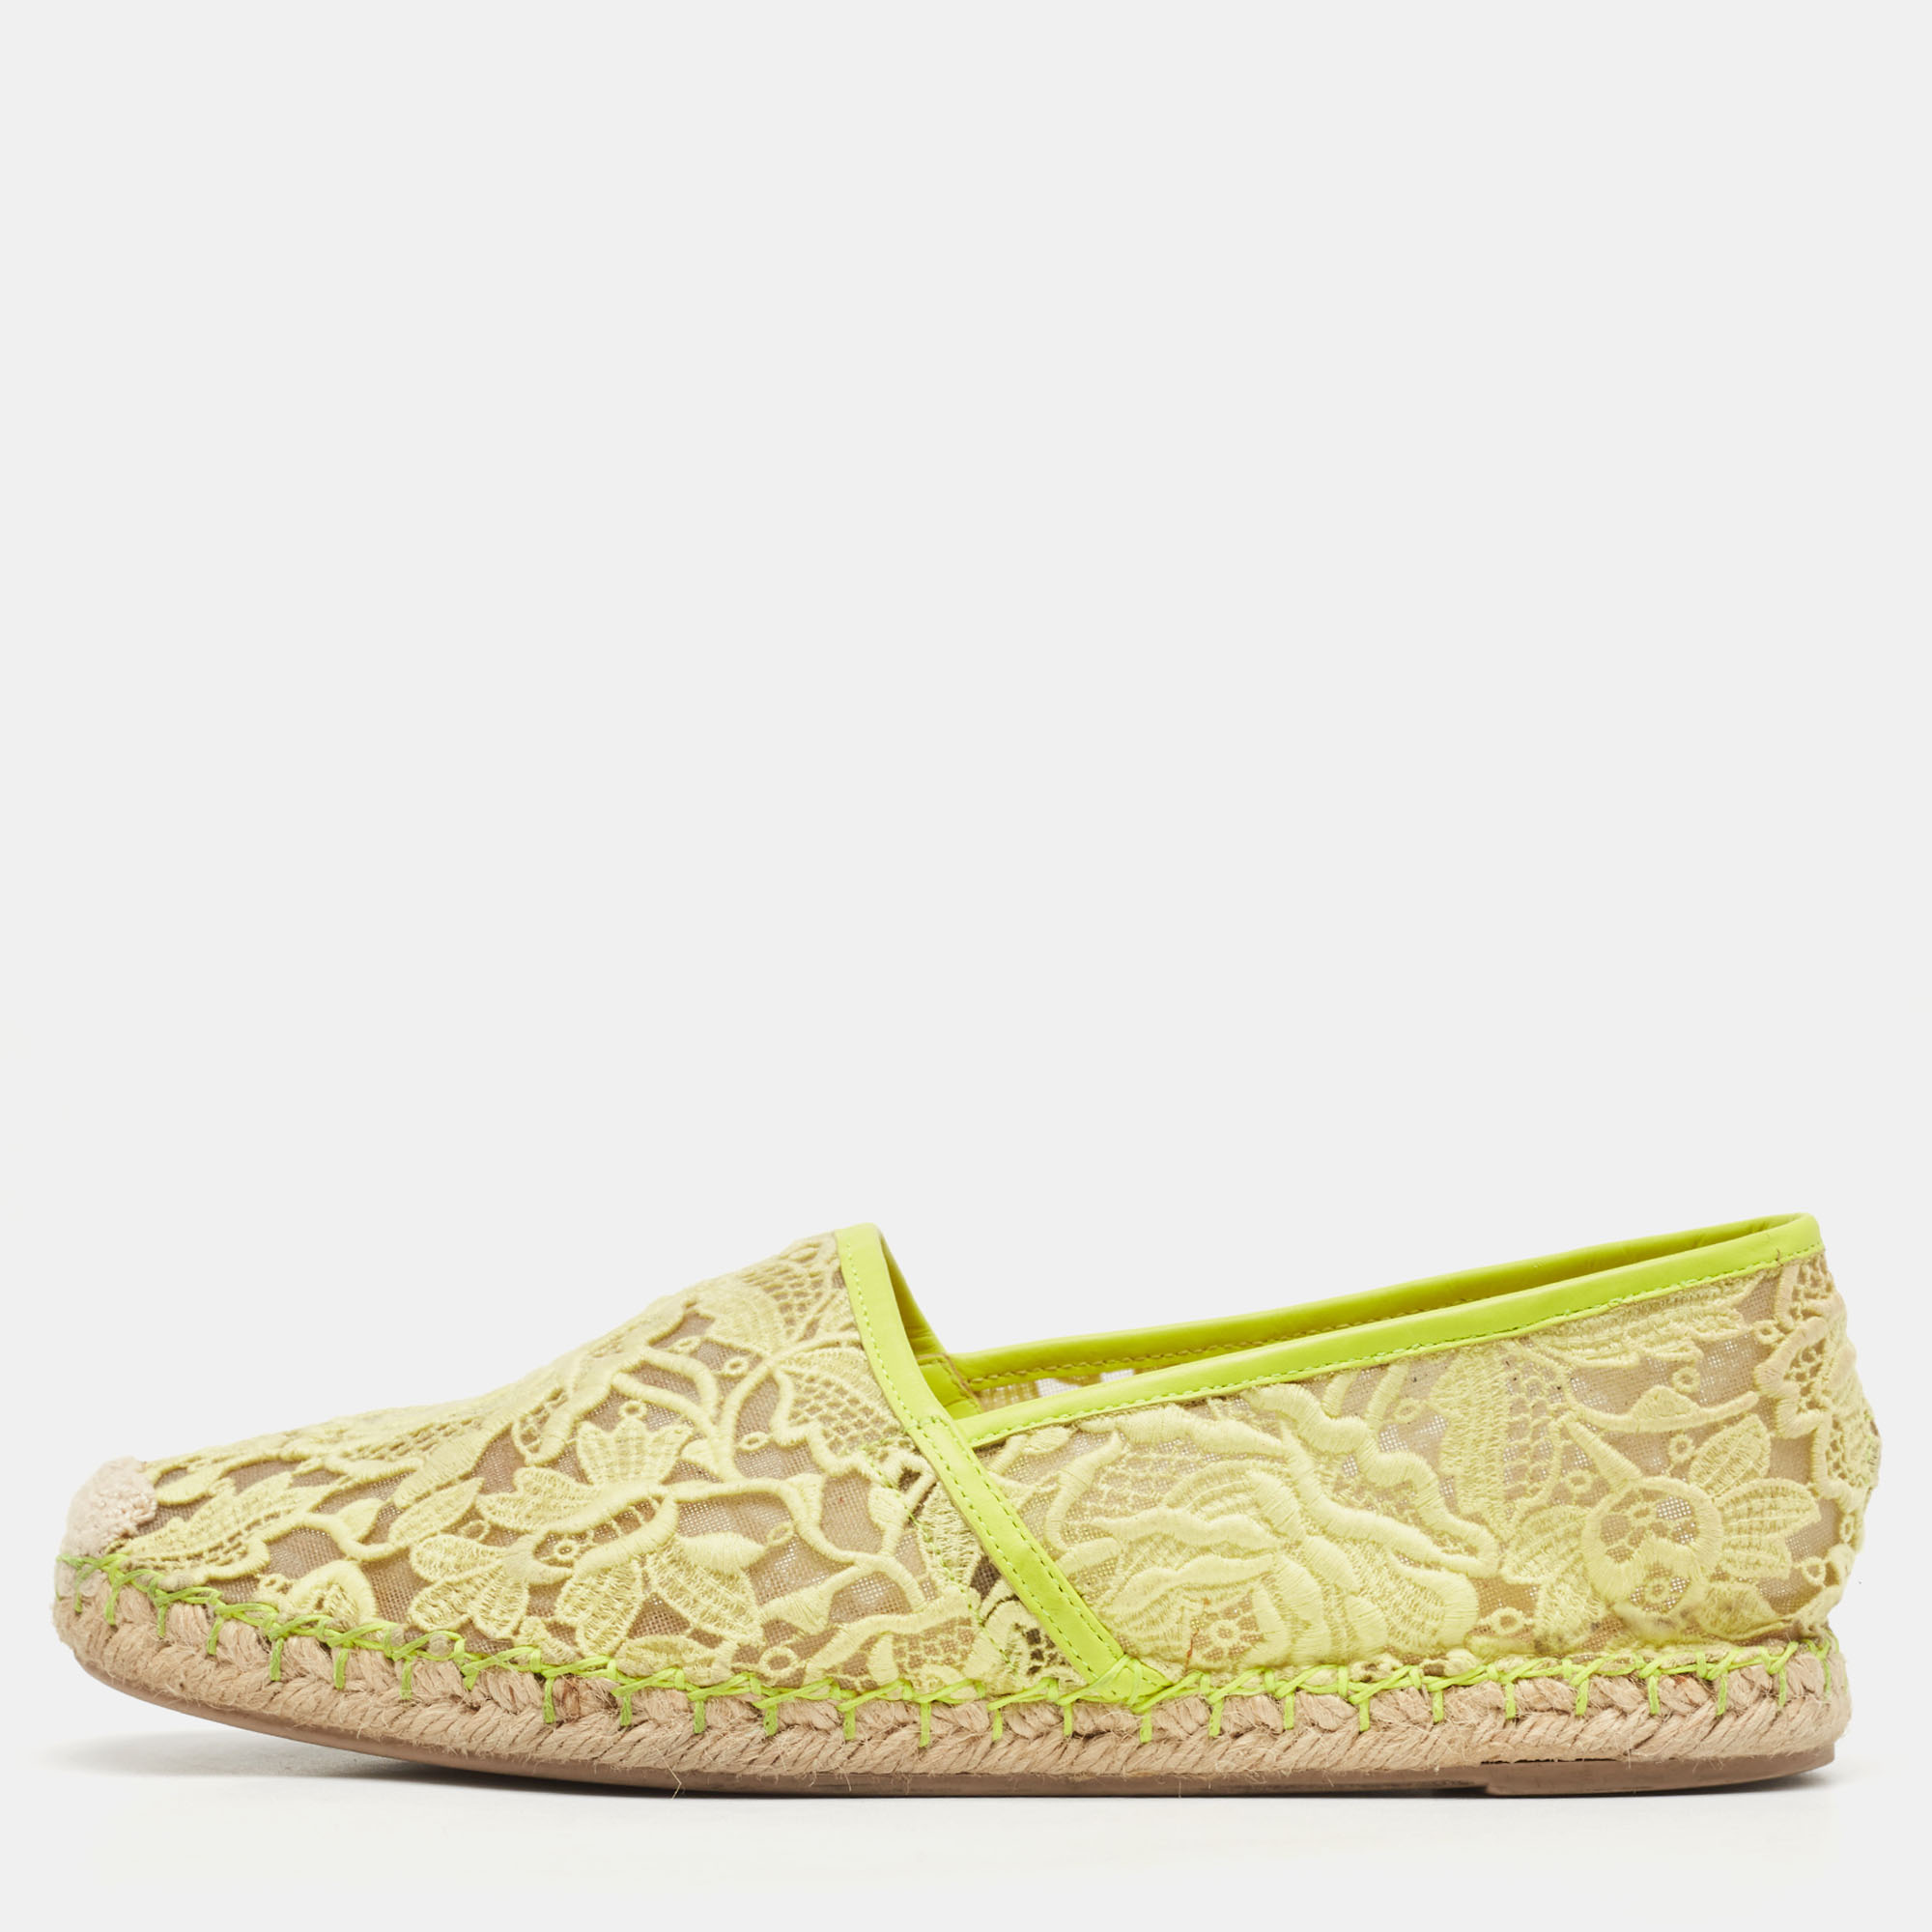 Pre-owned Valentino Garavani Neon Yellow Lace And Leather Espadrille Flats Size 39